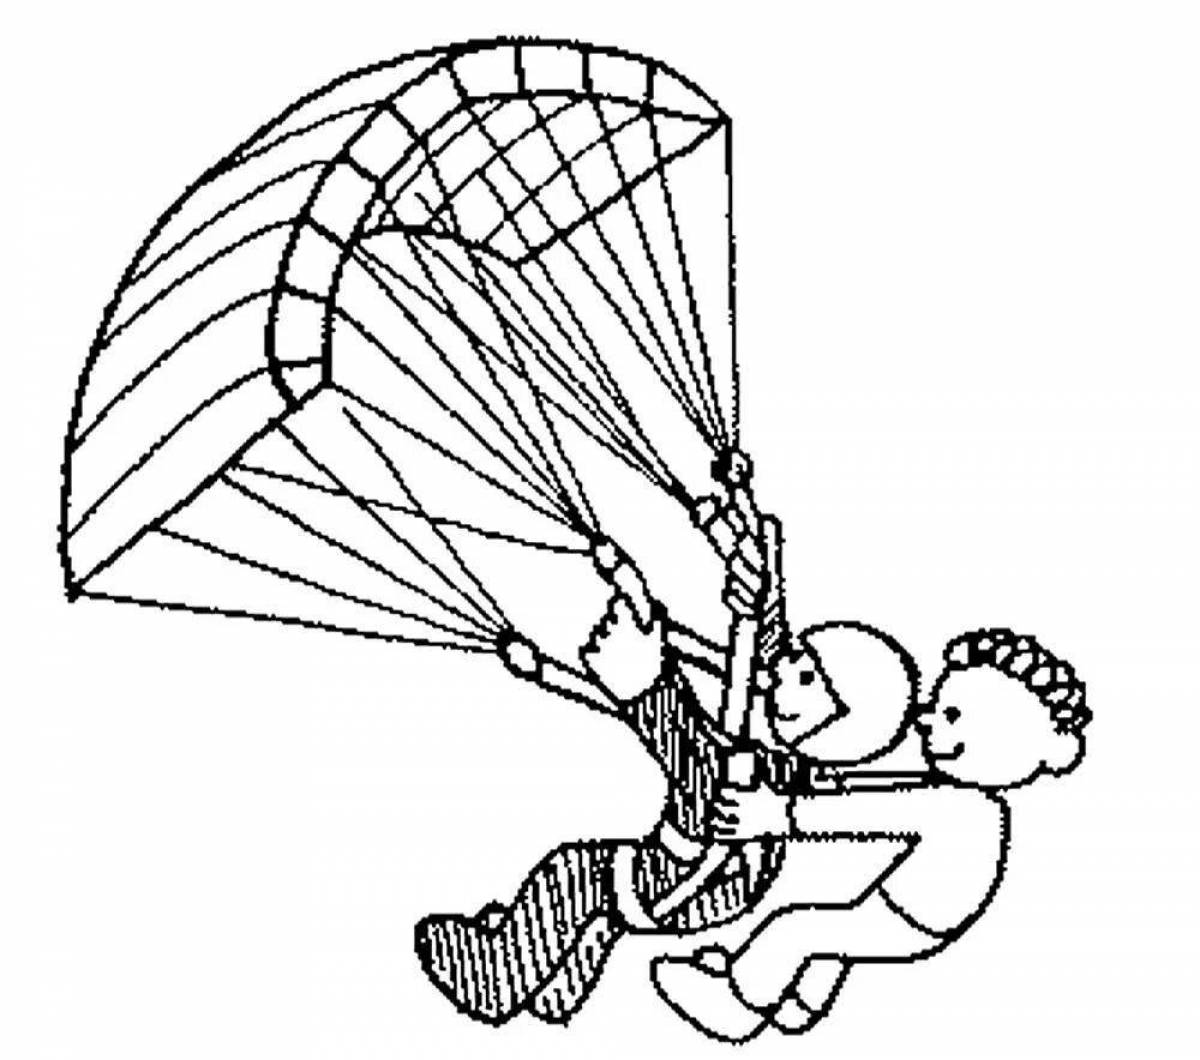 Creative military skydiver coloring book for kids